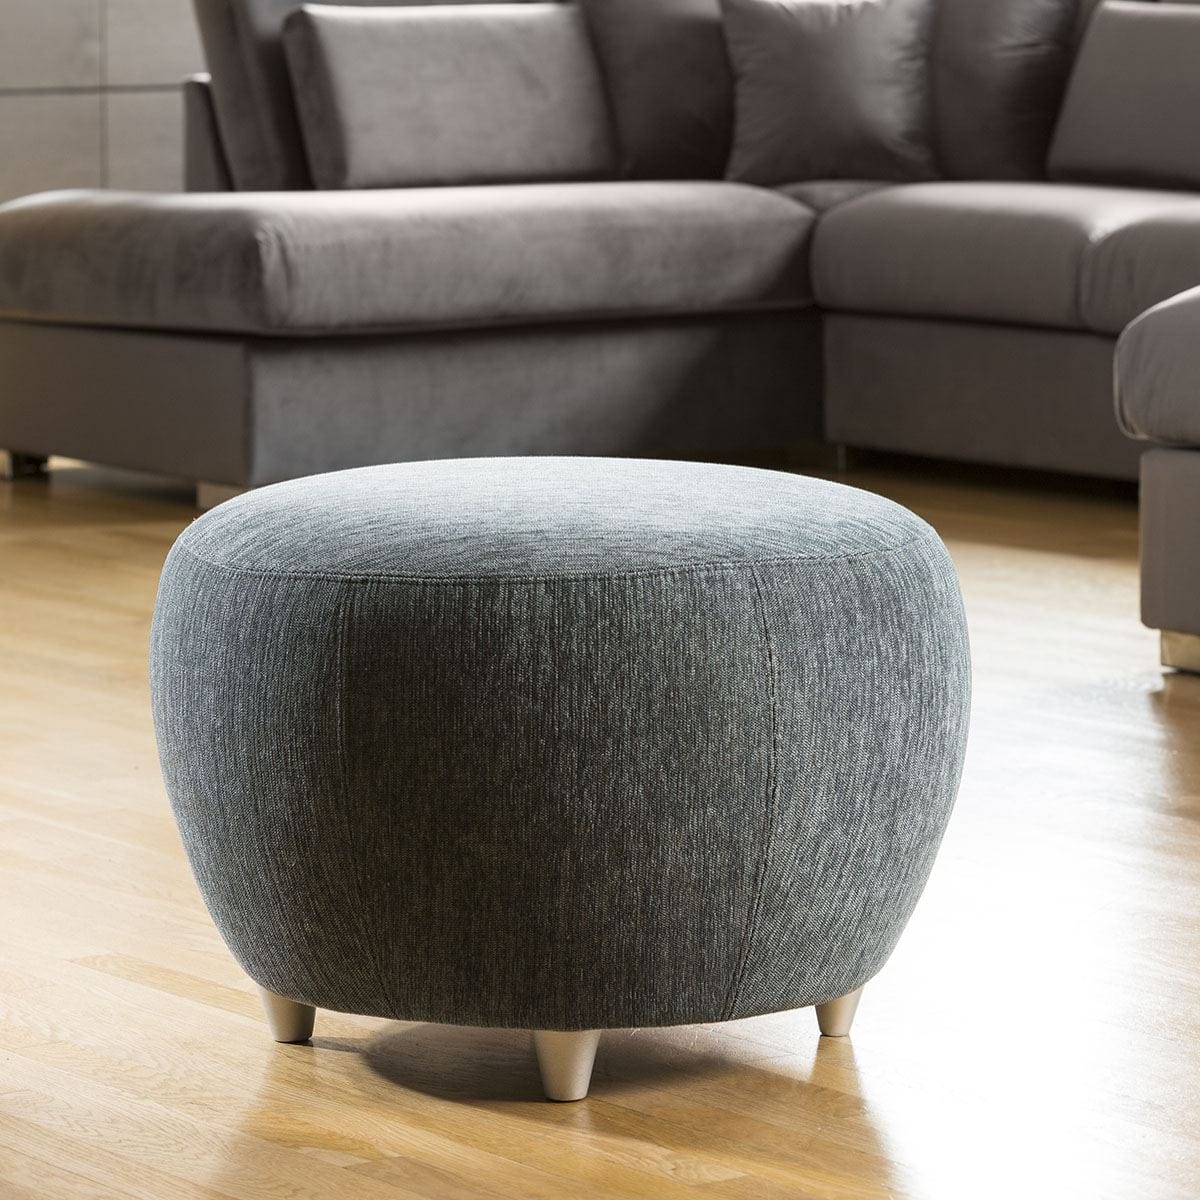 Quatropi Round 70cm Footstool Made to Order, Choose which colour swatches you would like